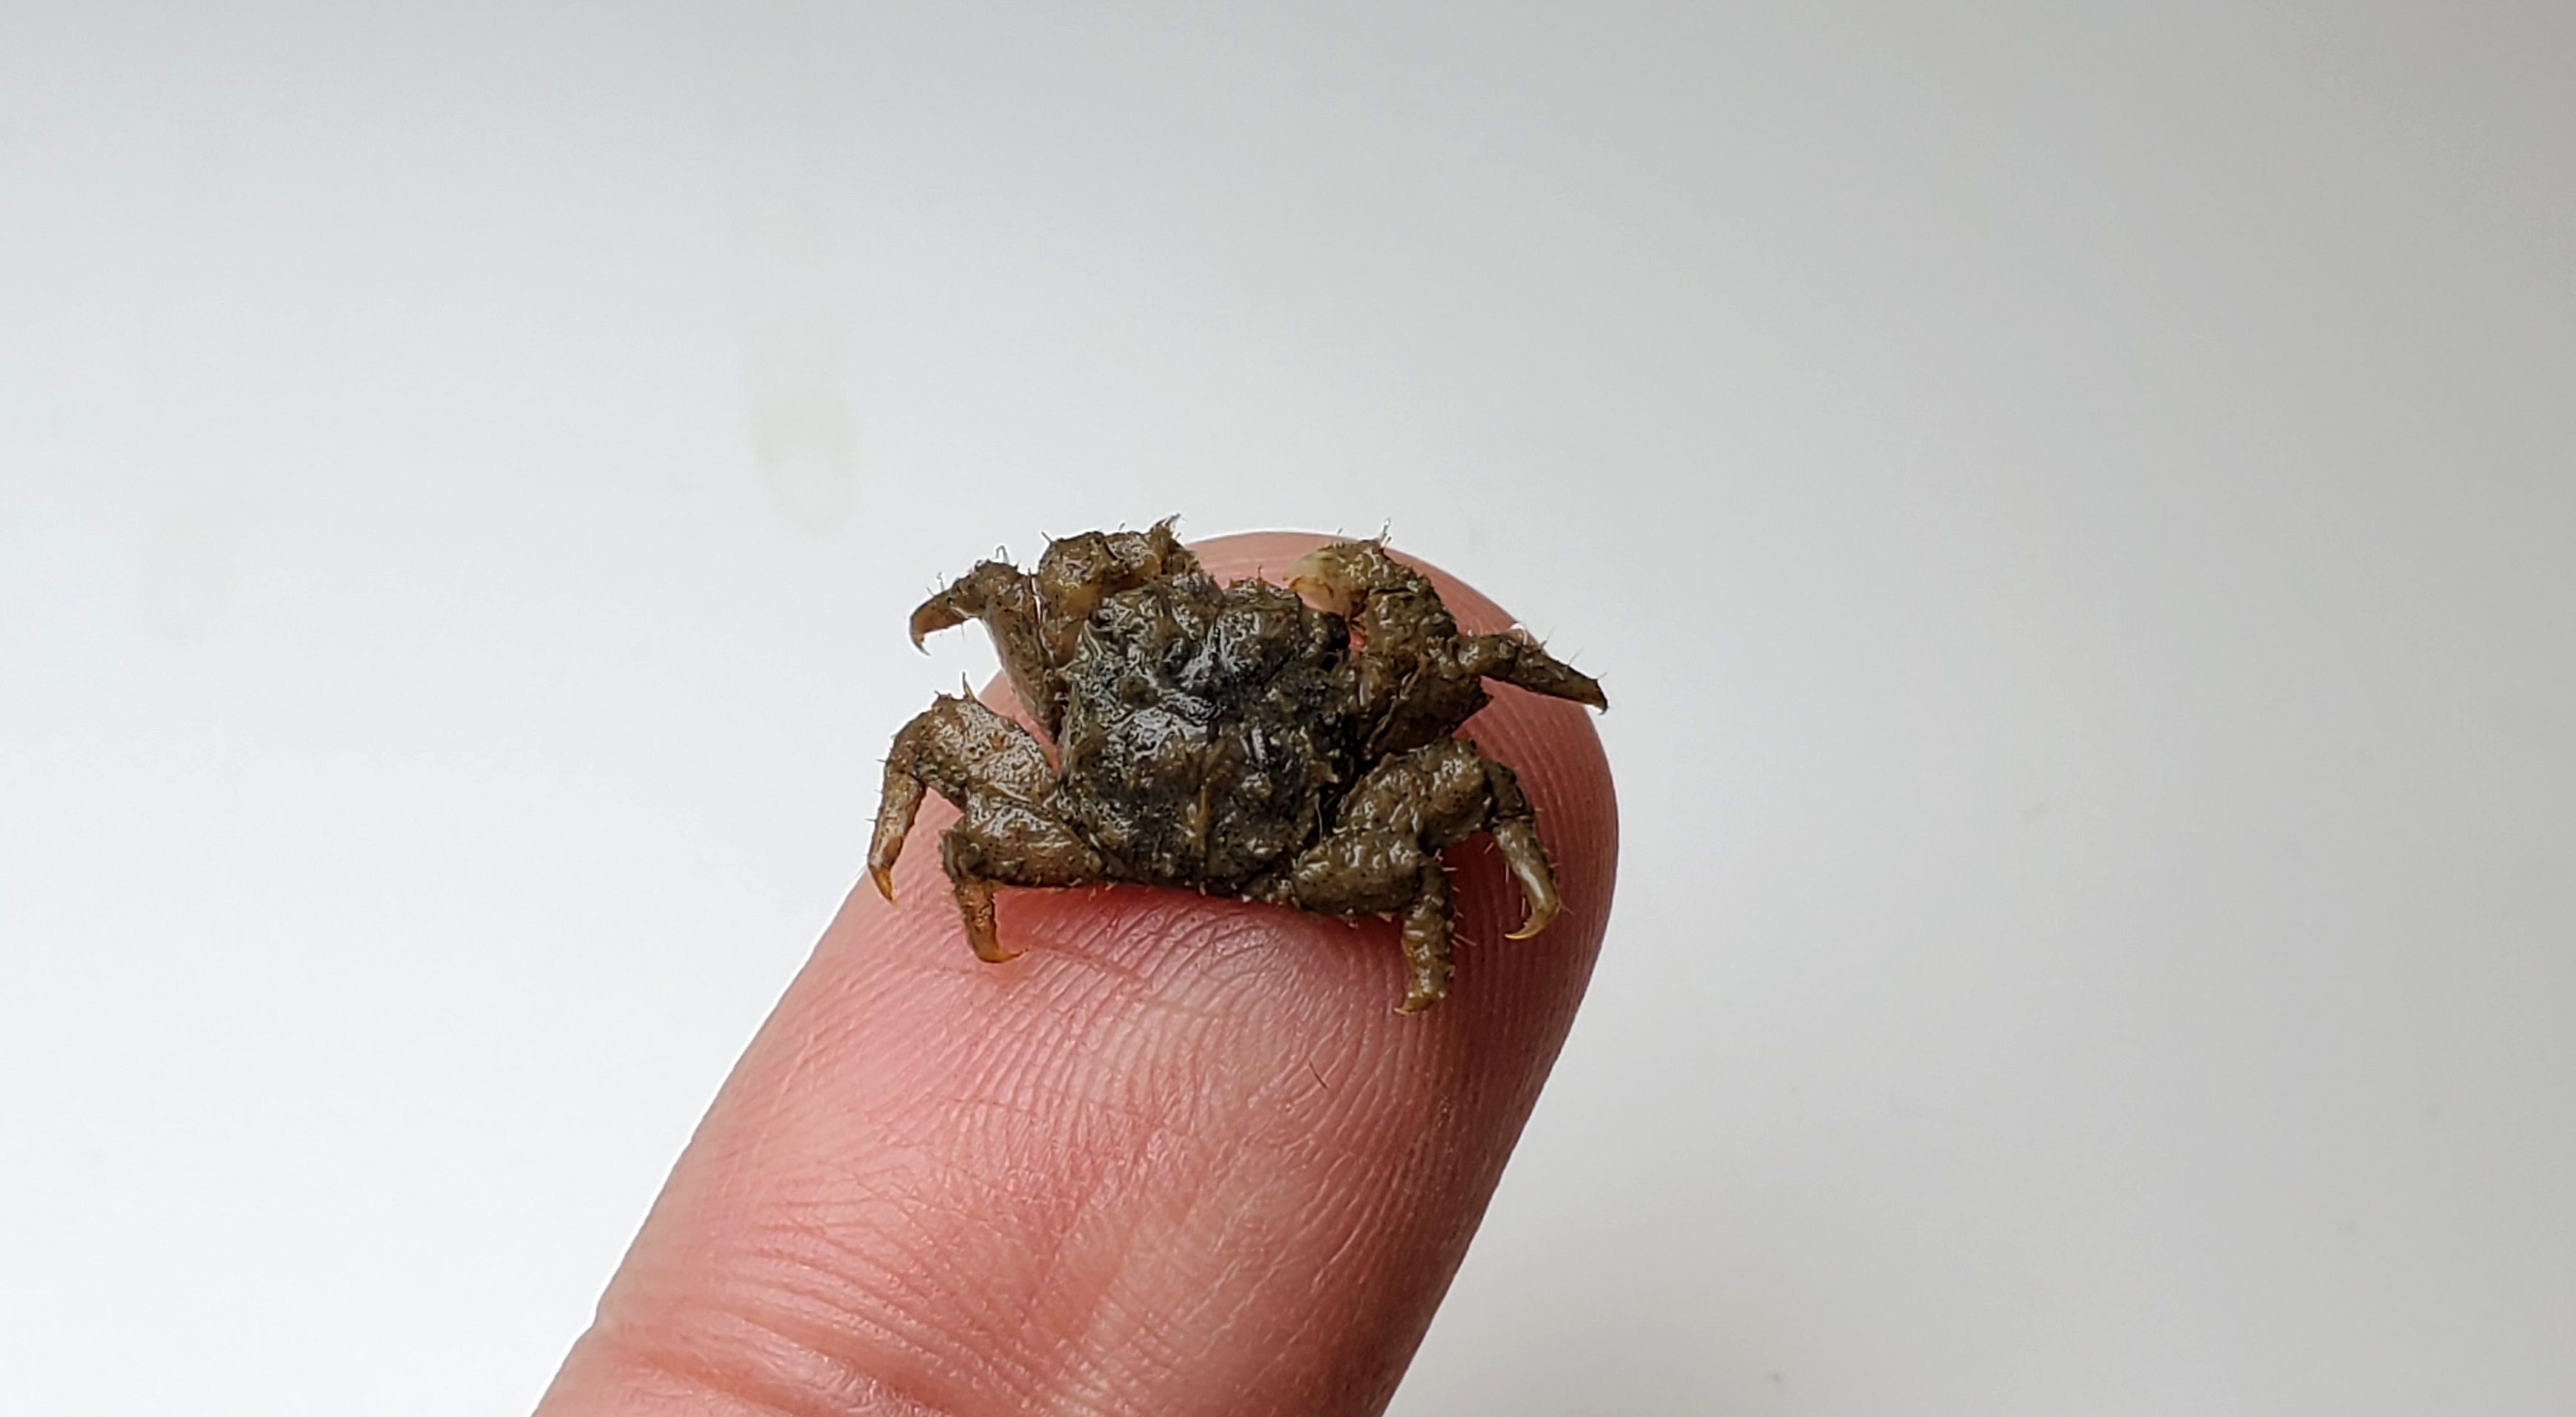 A small crab rests on a fingertip.